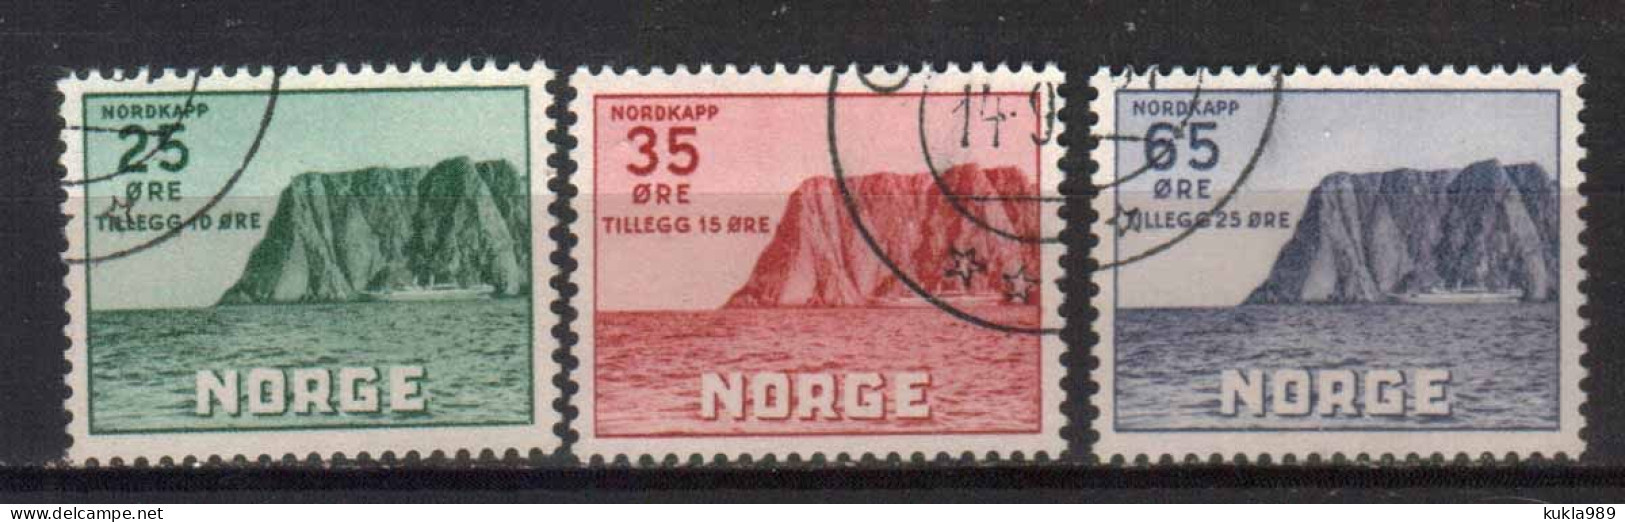 NORWAY STAMPS, 1930, Sc.#B1-B3, USED - Oblitérés